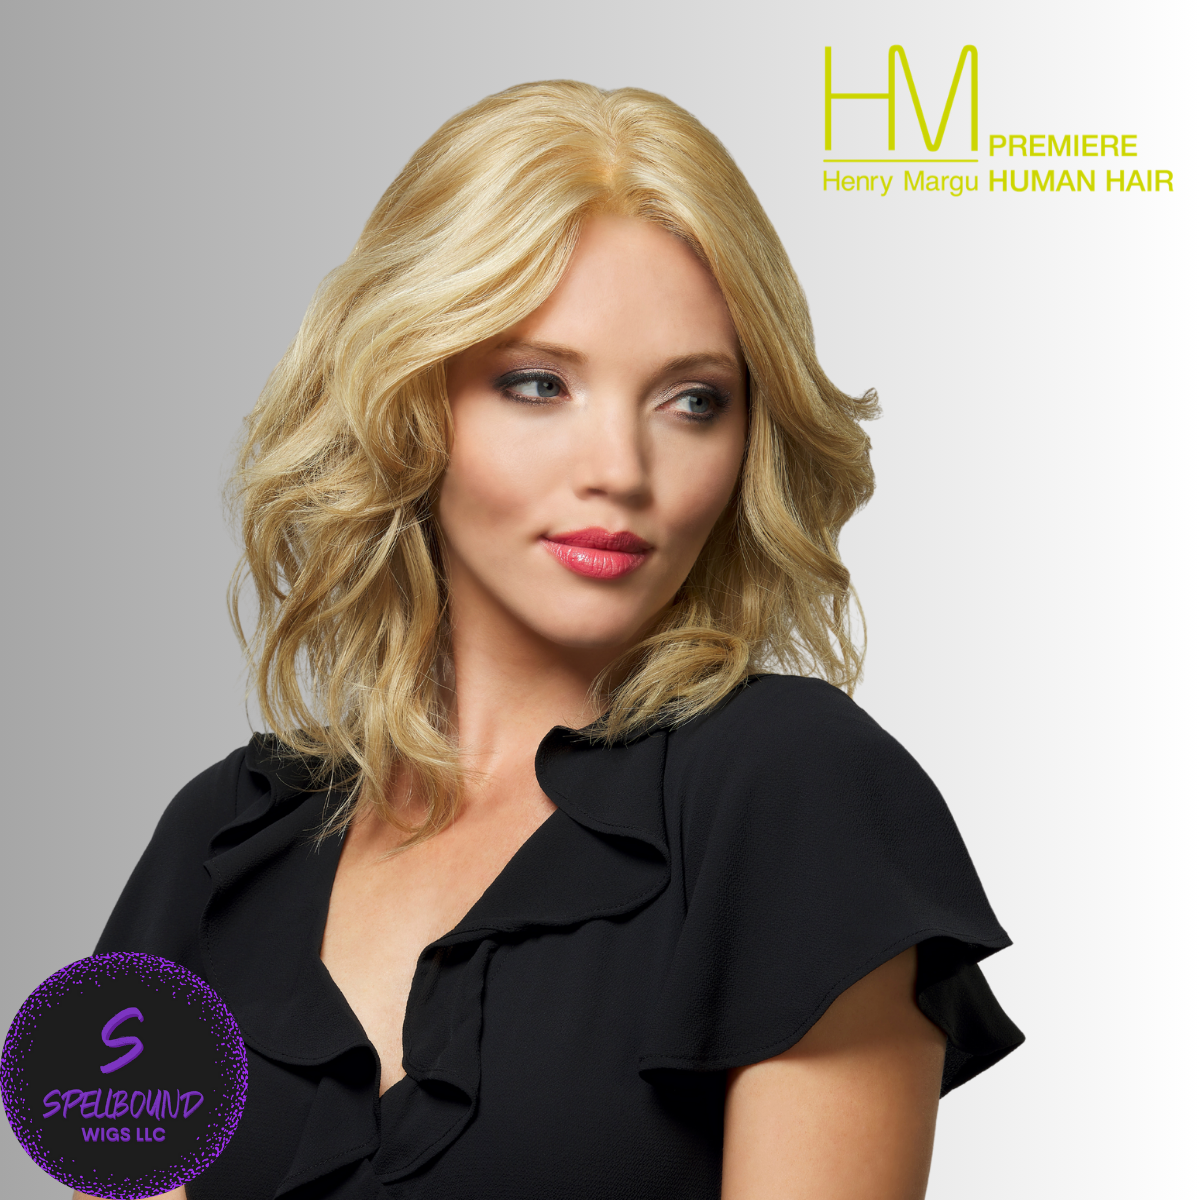 Emerald - Premiere Remy Human Hair Wig Collection by Henry Margu